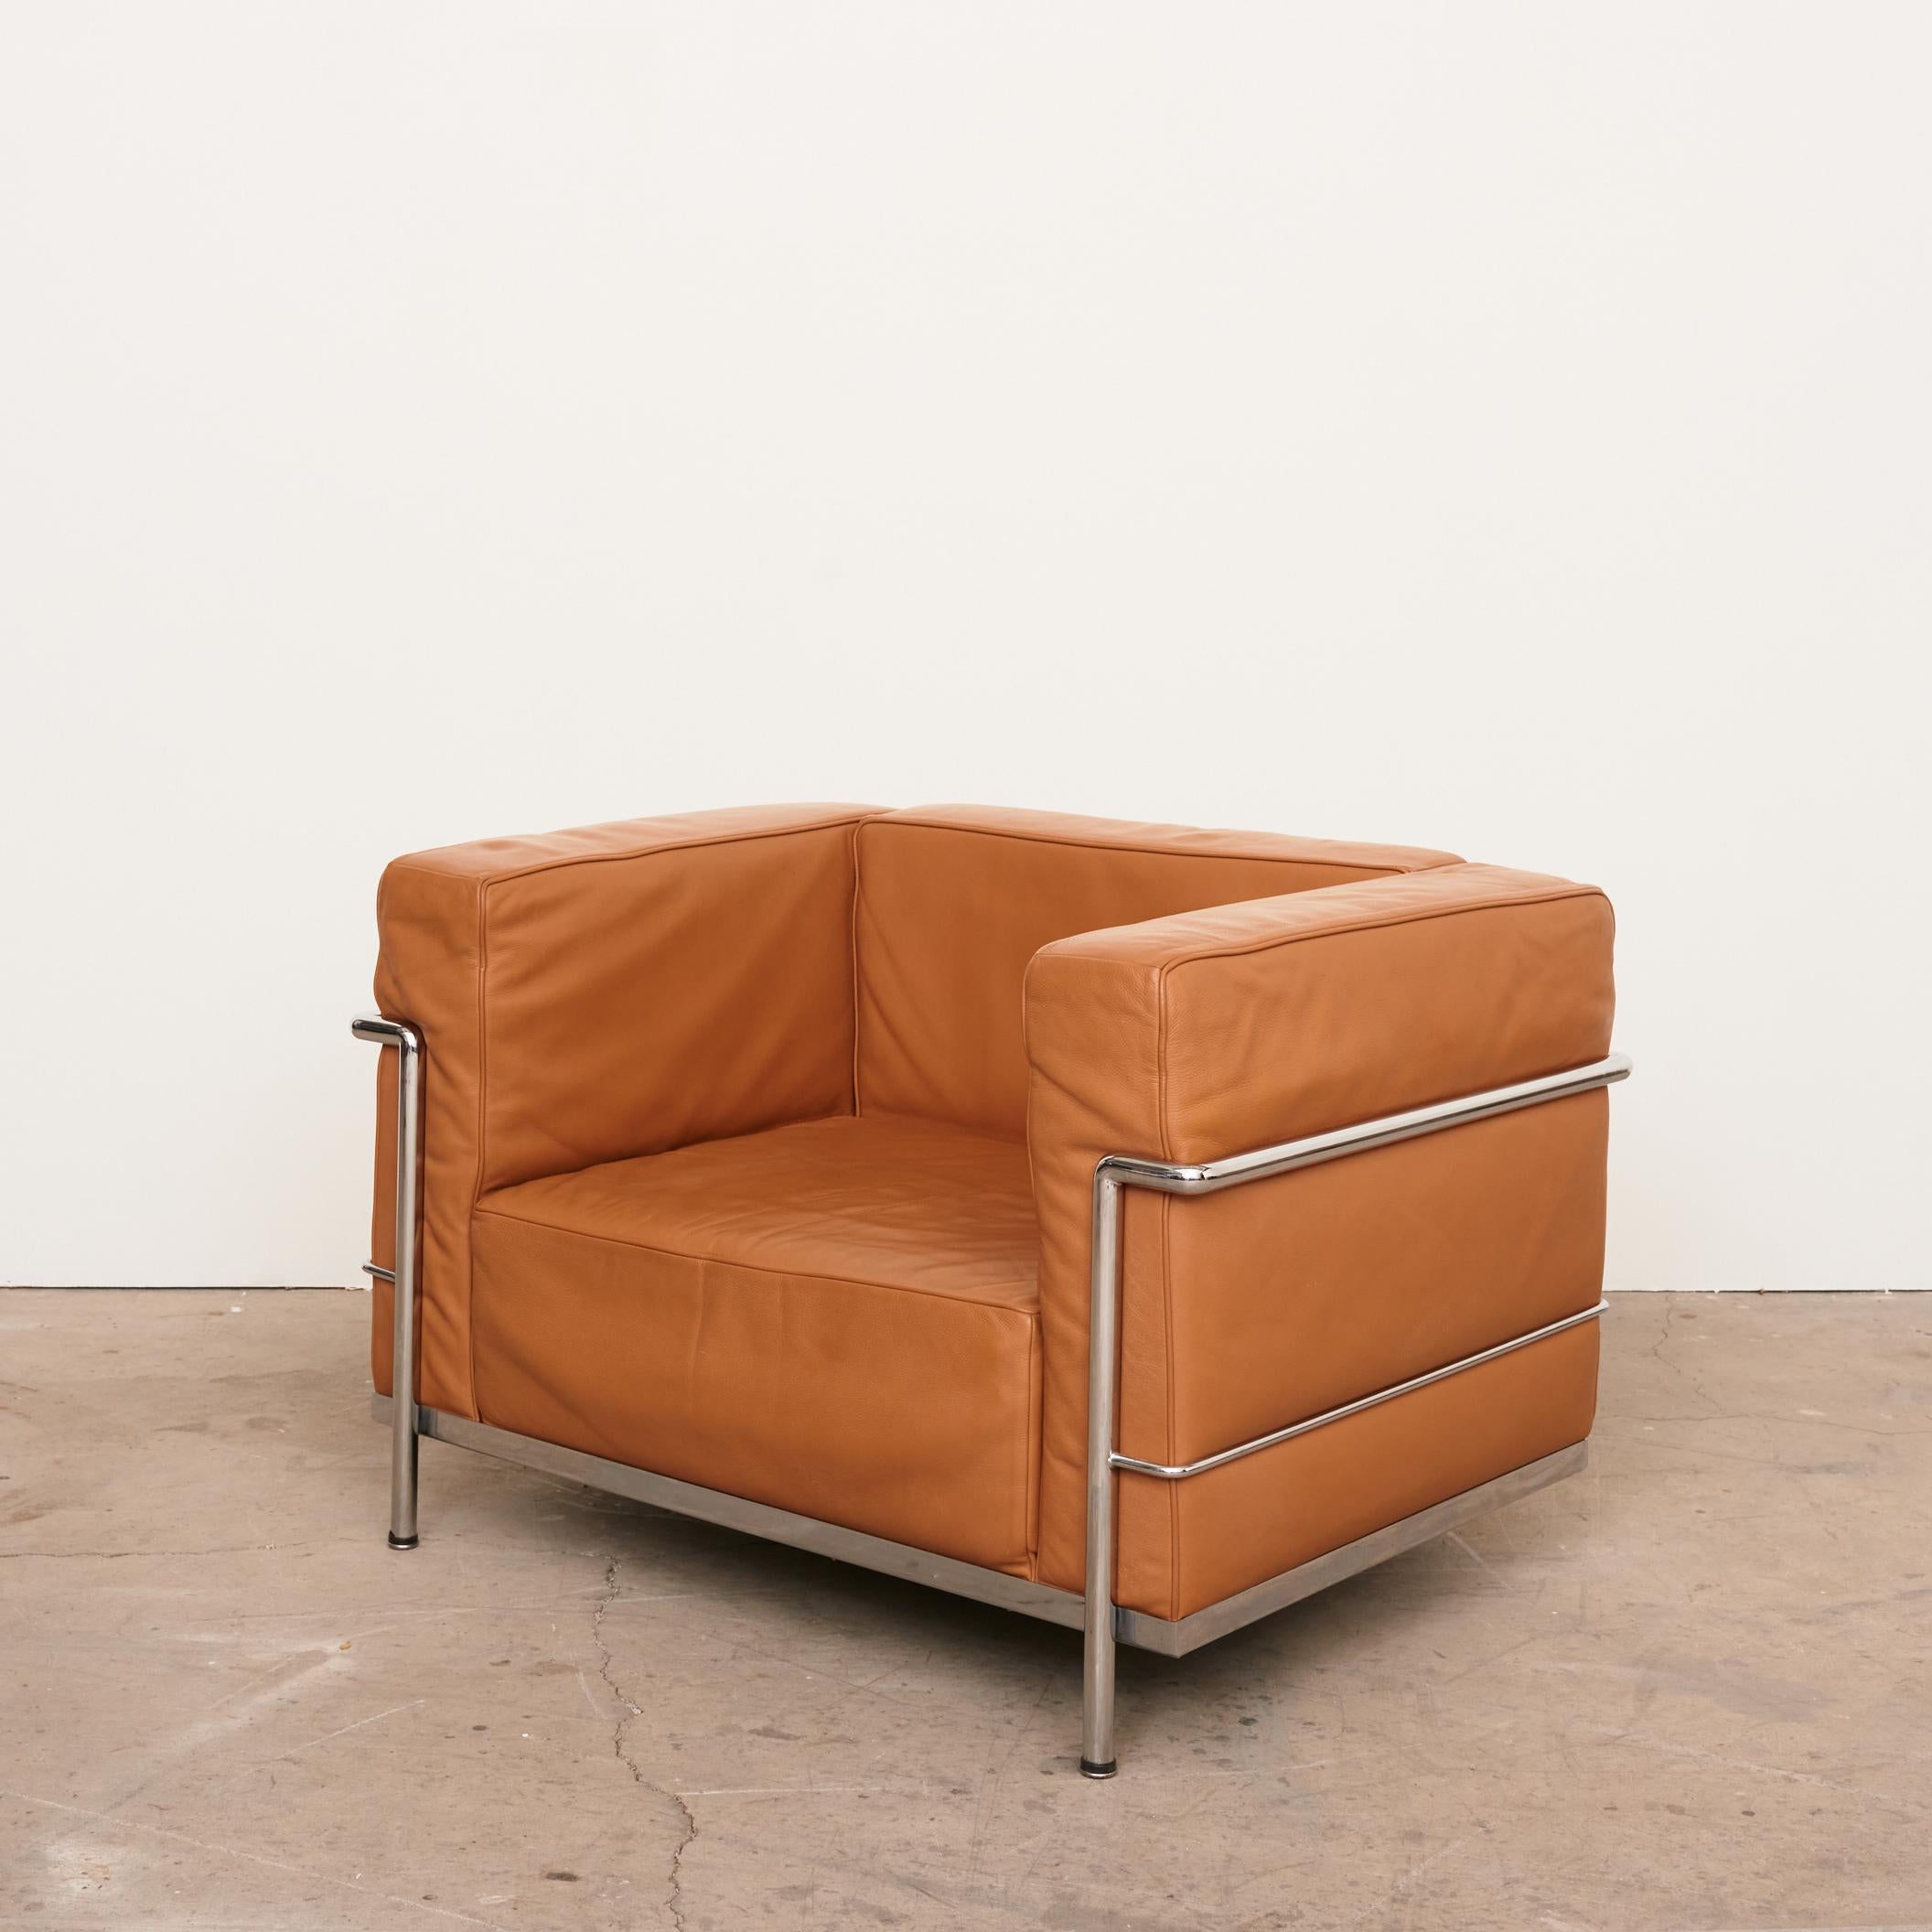 LC3 Grand Modele Armchair in Tobacco leather manufactured by DWR.